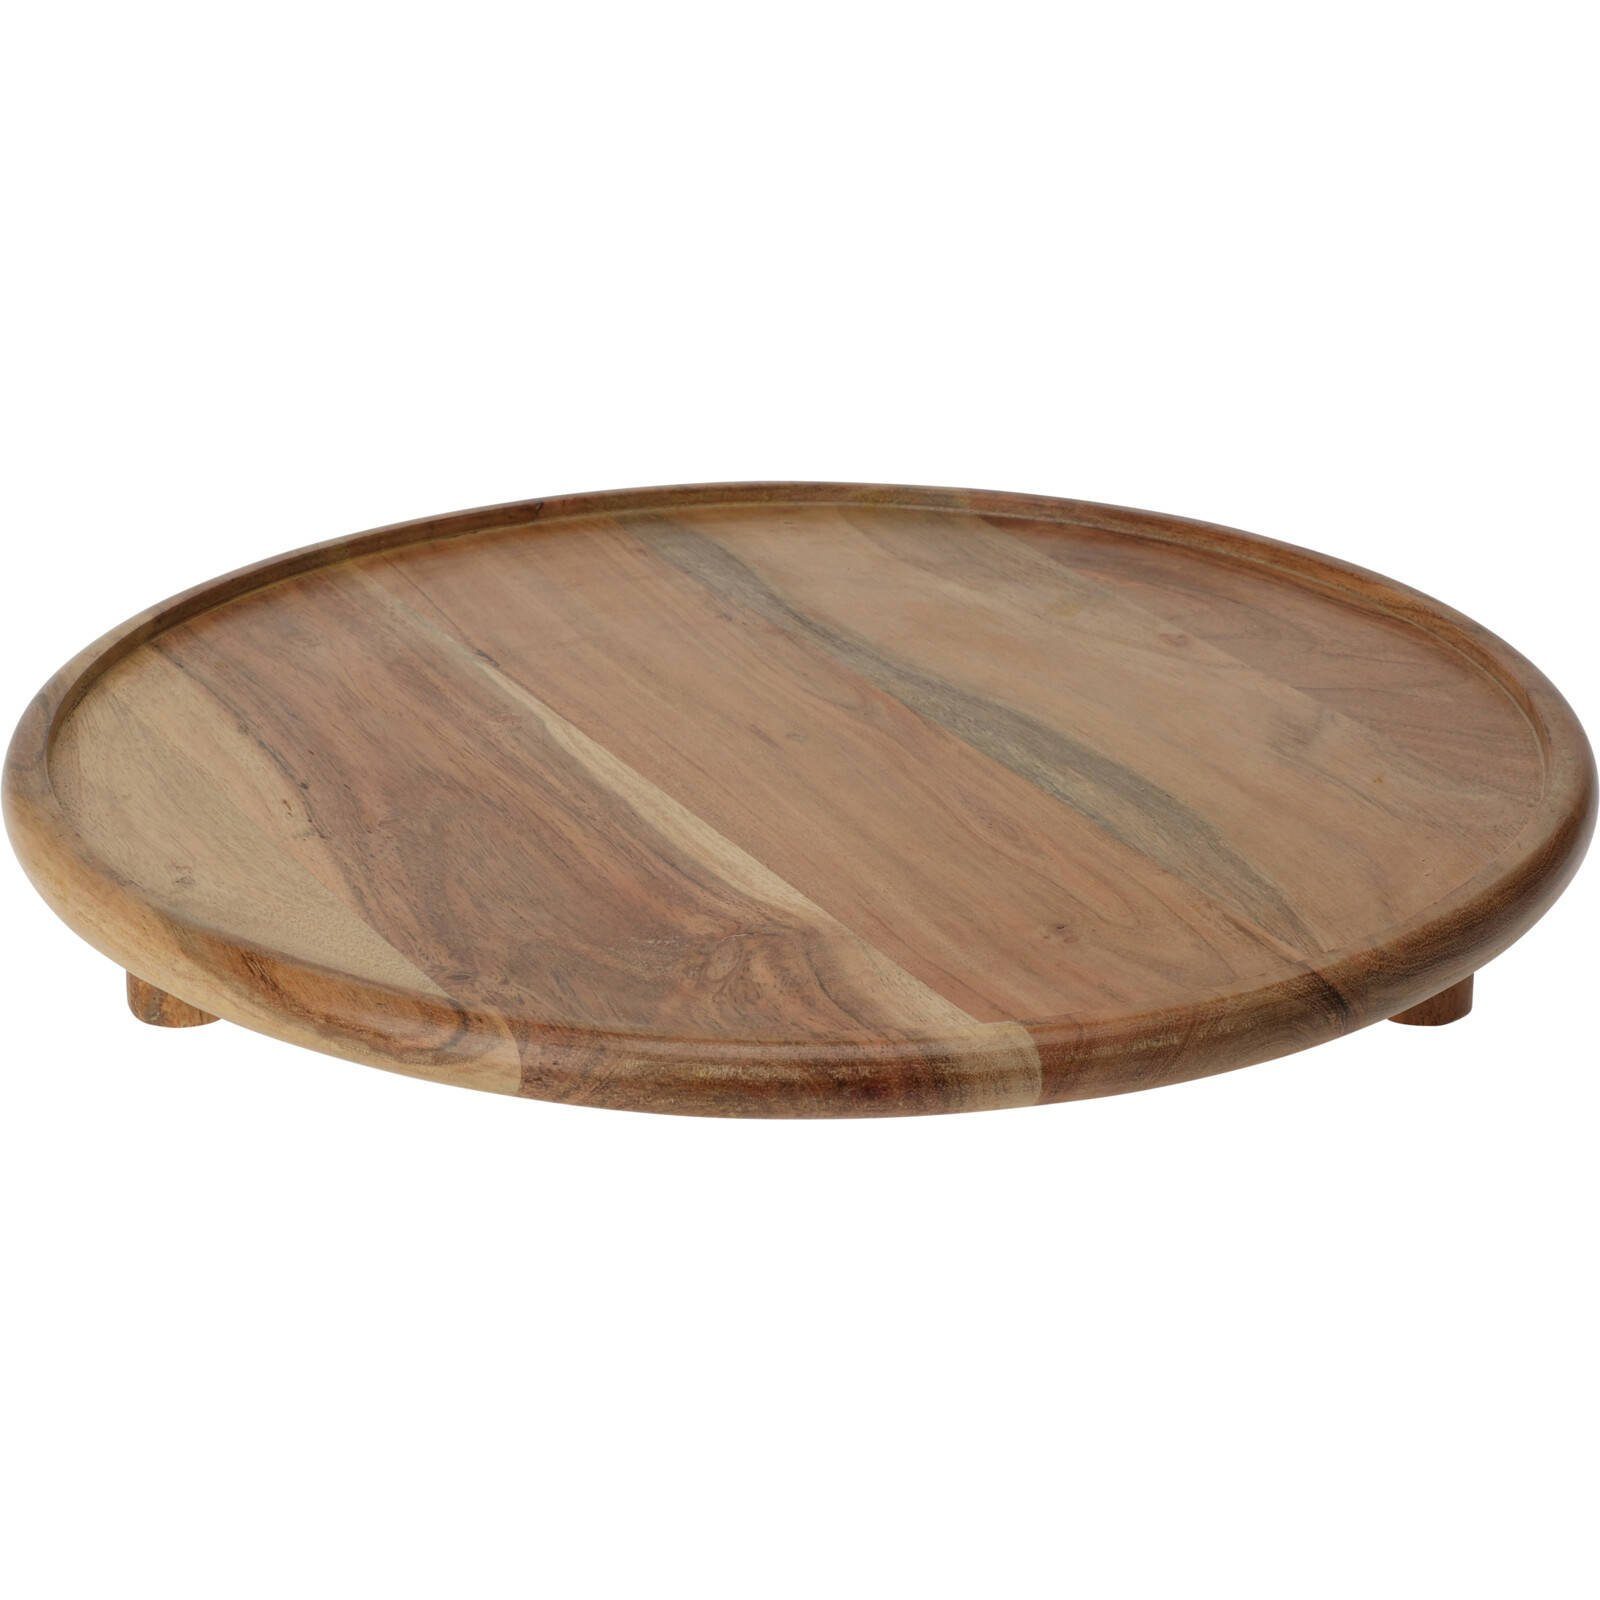 Home & styling collection Tablett Servierbrett, Holz